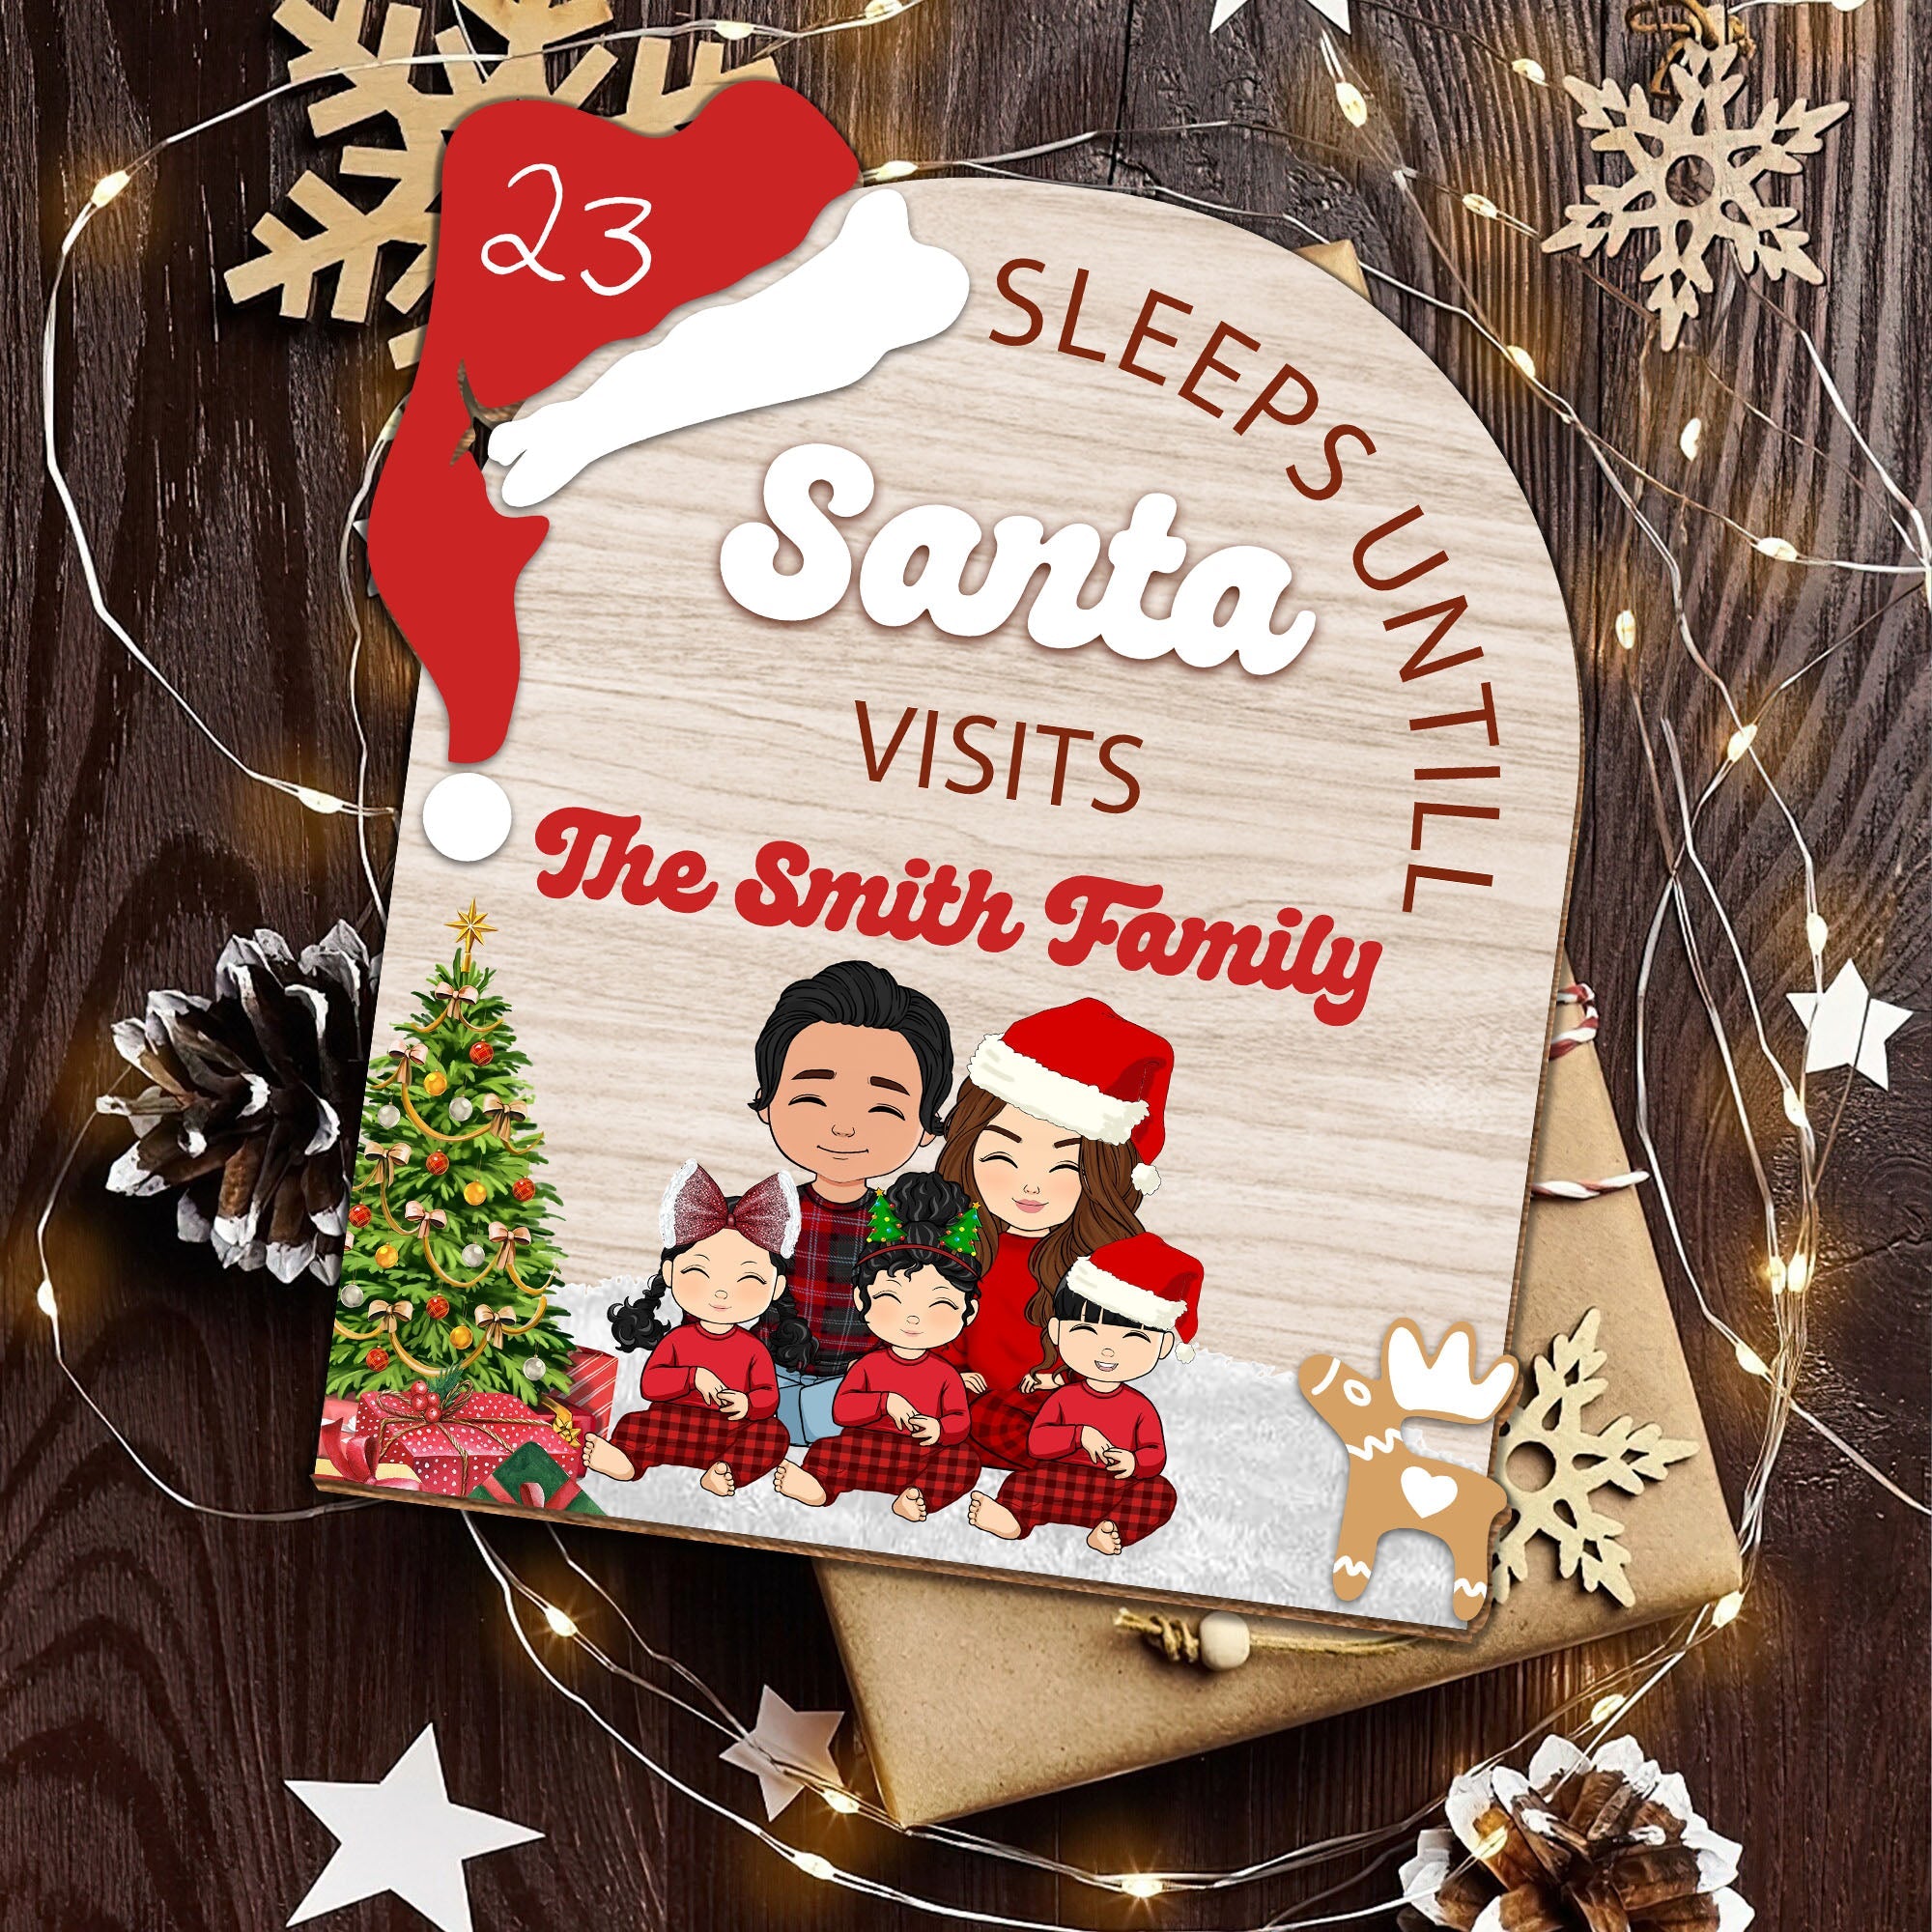 Sleeps Until Santa Visits Our Family - Counting By Yourself -  Christmas Countdown Sign